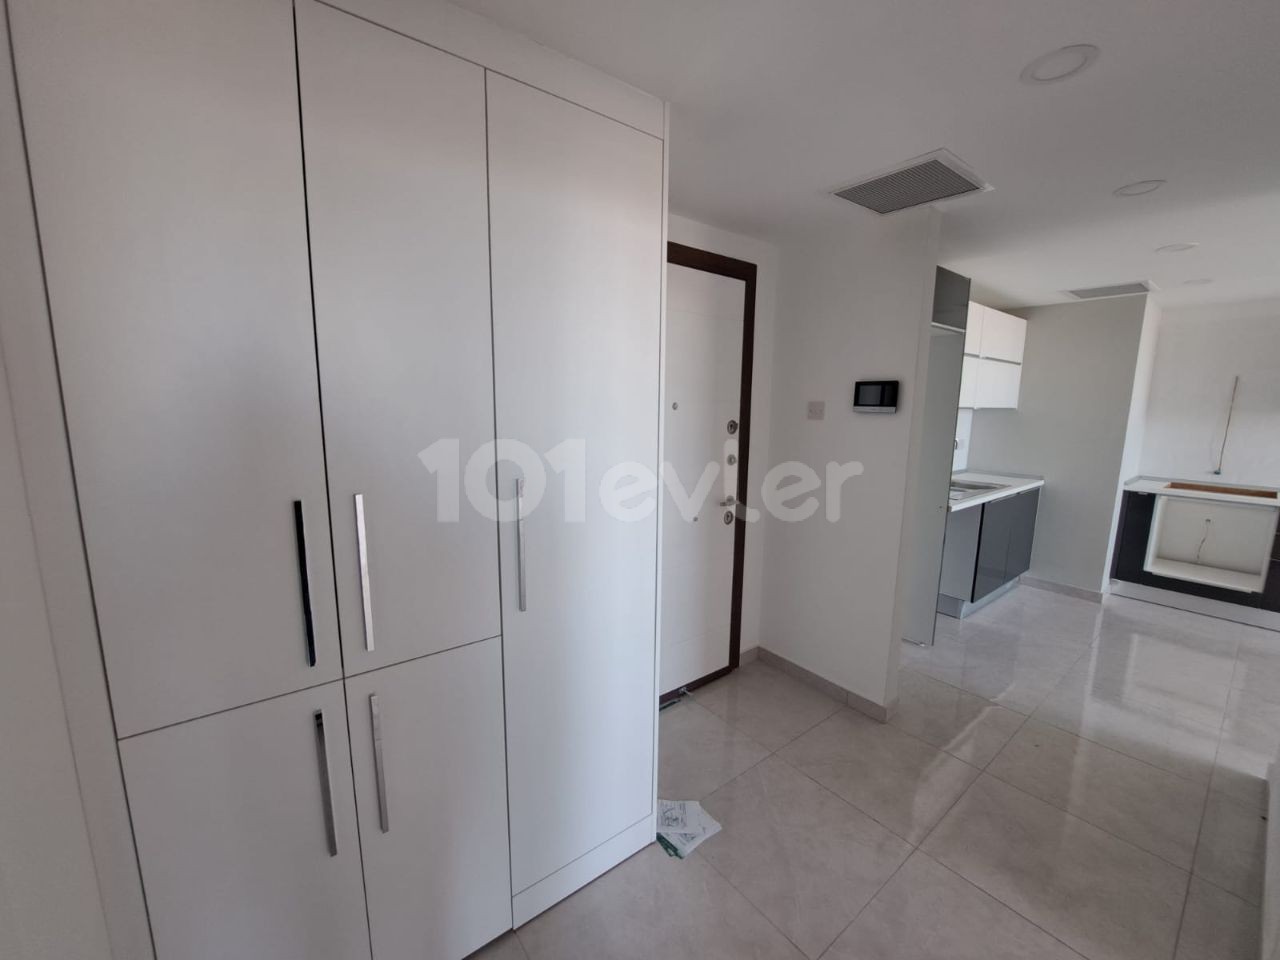 Urgent! 2+1 Flat for Sale in New Premier!